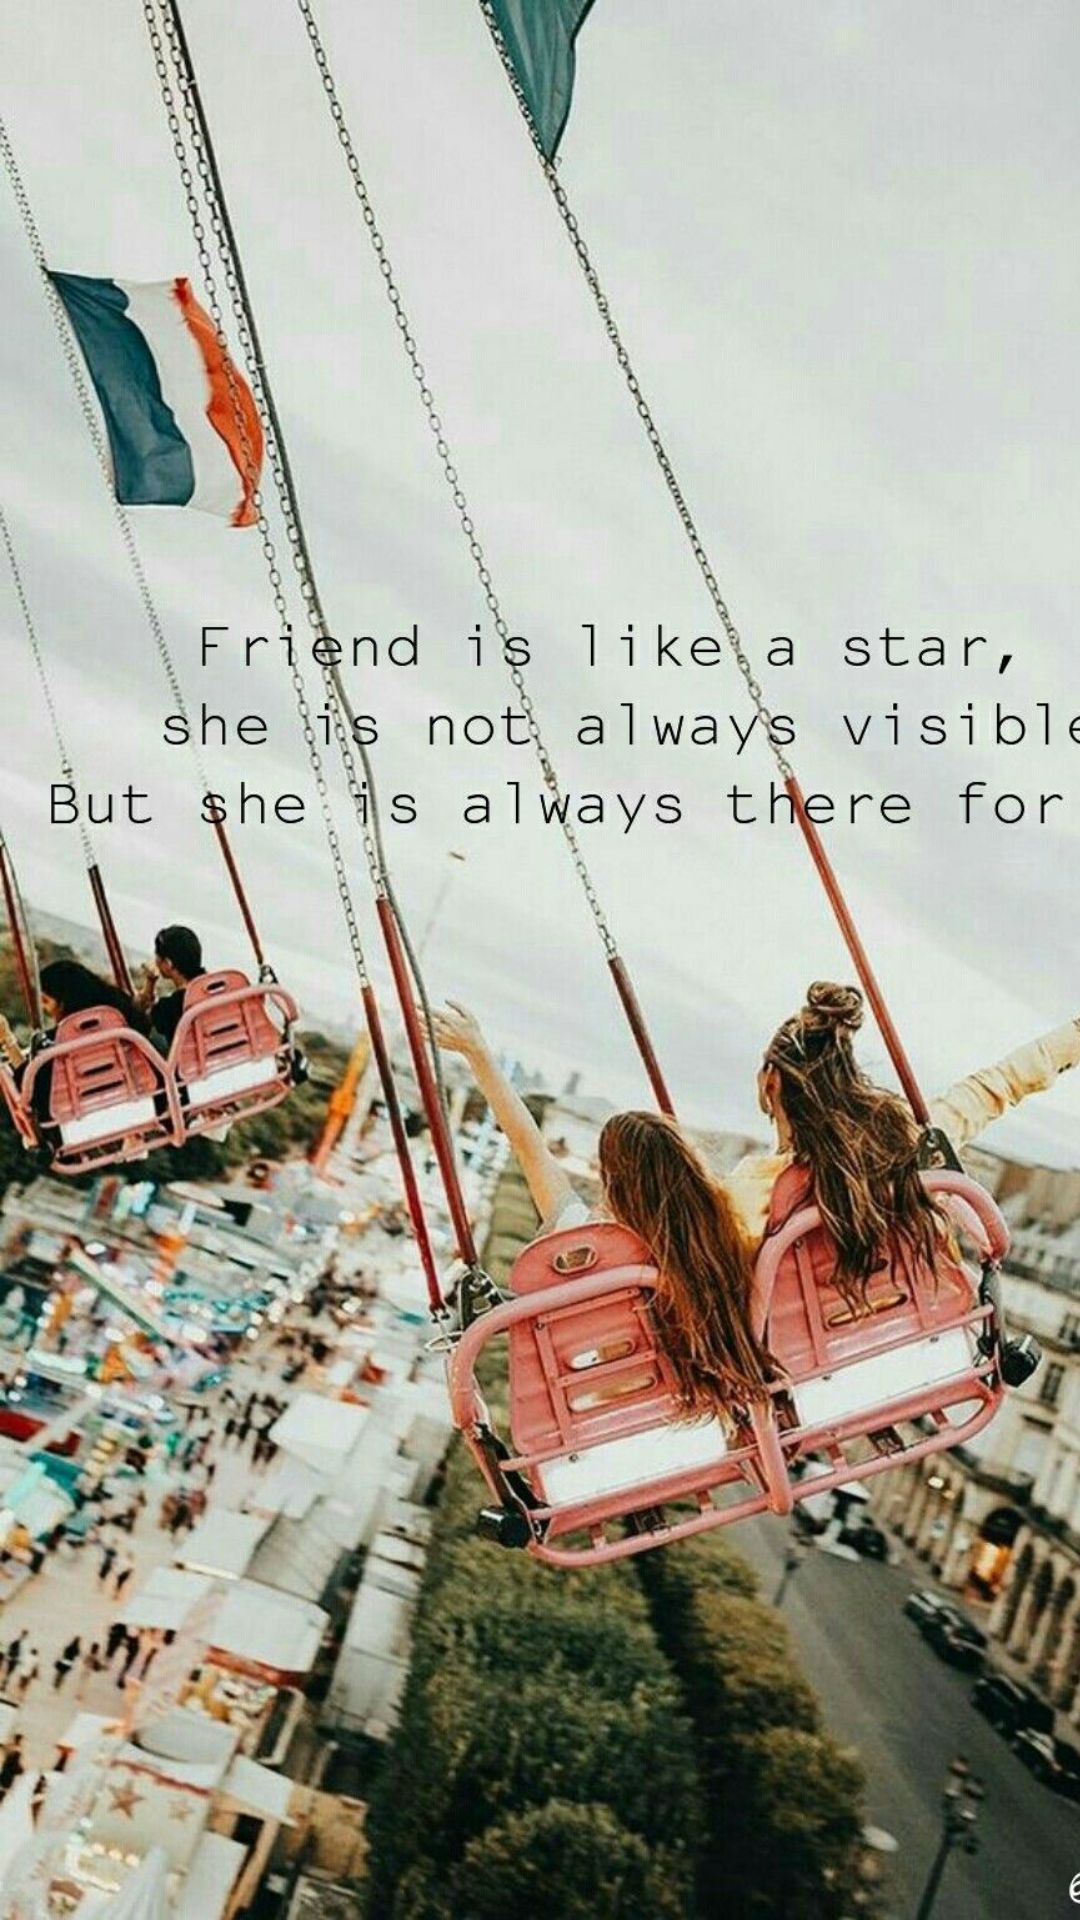 Friend is like a star, she is not always visible. But she is always there for you. - Bestie